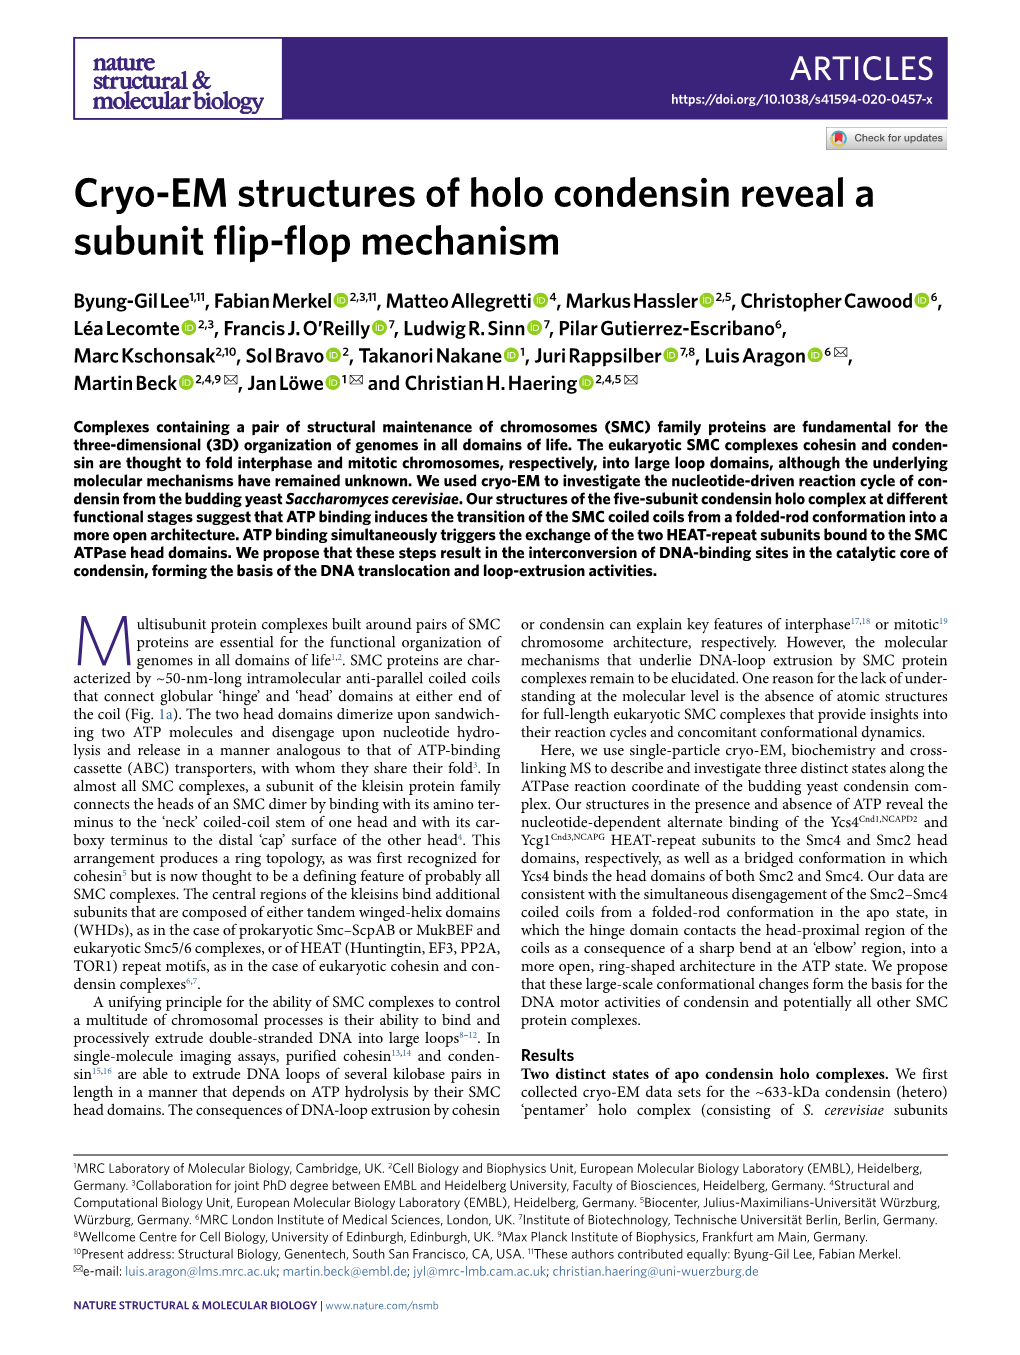 Cryo-EM Structures of Holo Condensin Reveal a Subunit Flip-Flop Mechanism